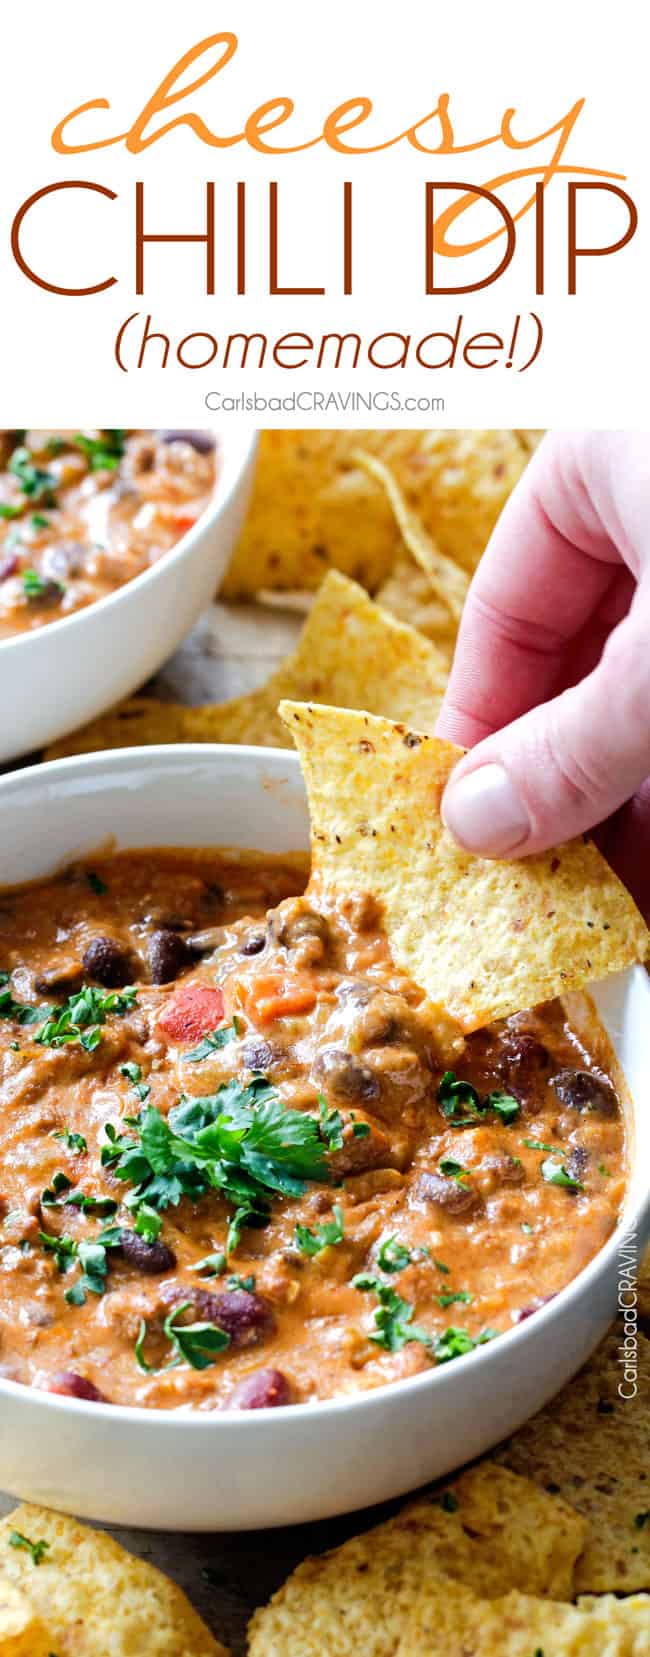 a chip dipping  into chili cheese dip with ground beef